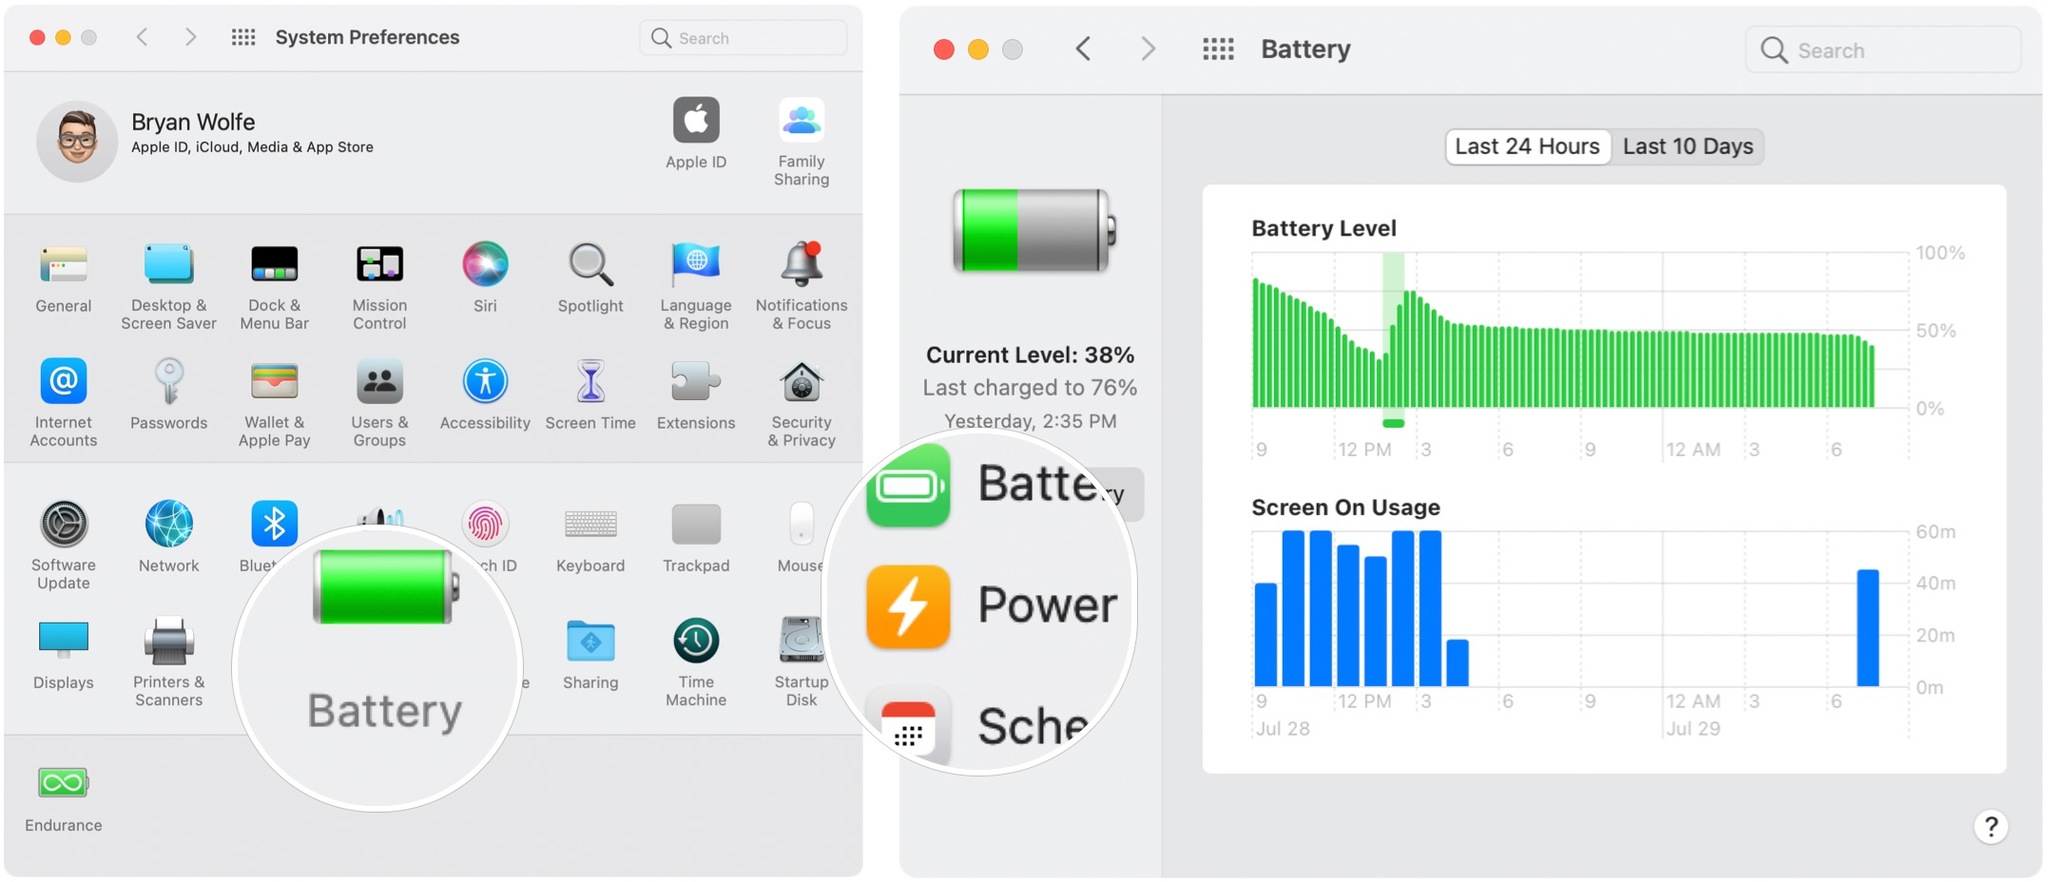 To use Low Power Mode with the power adapter, launch System Preferences, then select the battery pane. Select Power Adapter on the left side. 